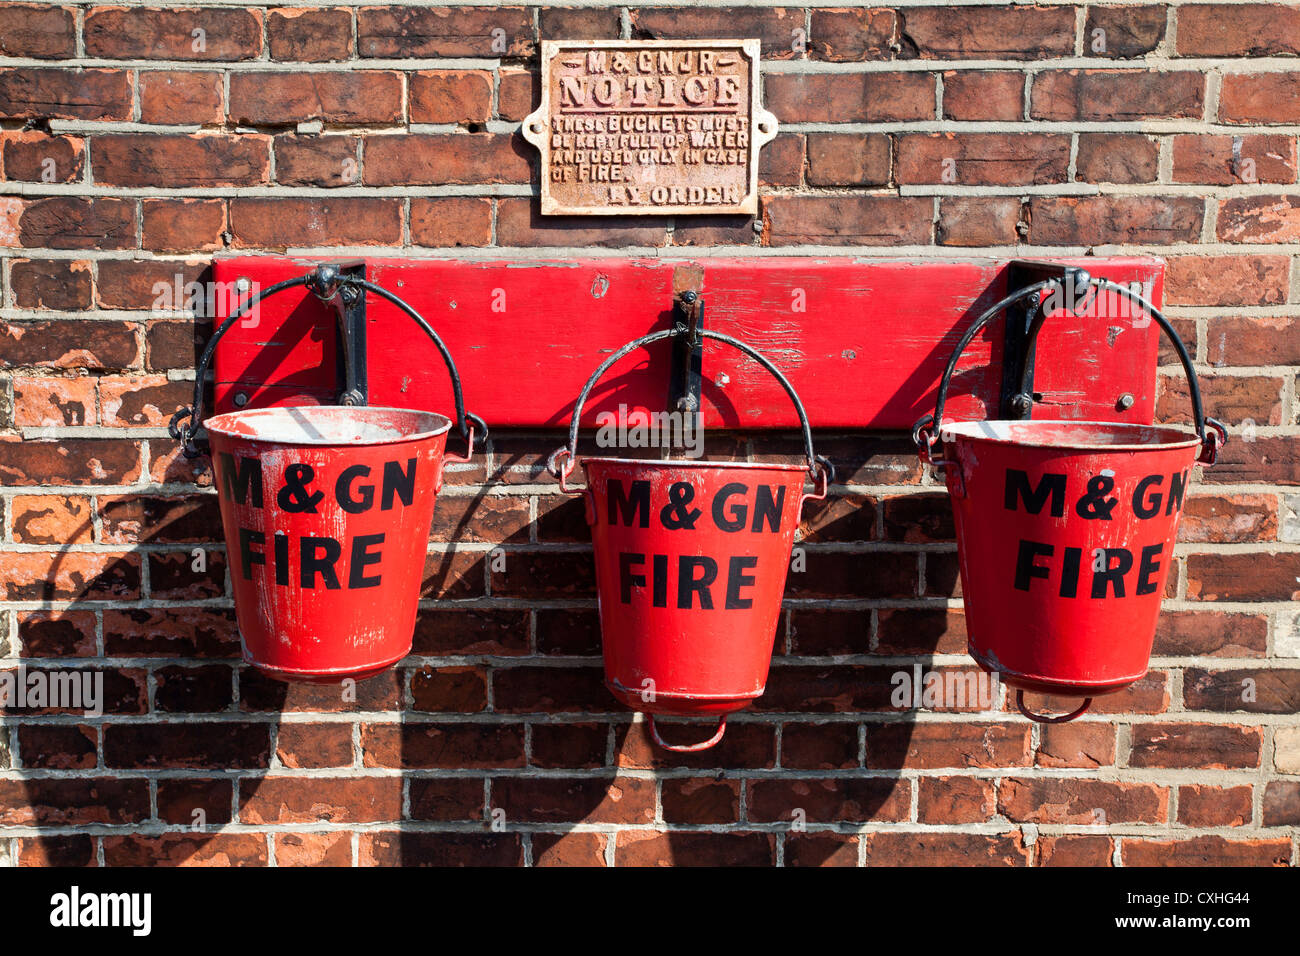 Railway Fire Buckets Vintage Style Metal Sign